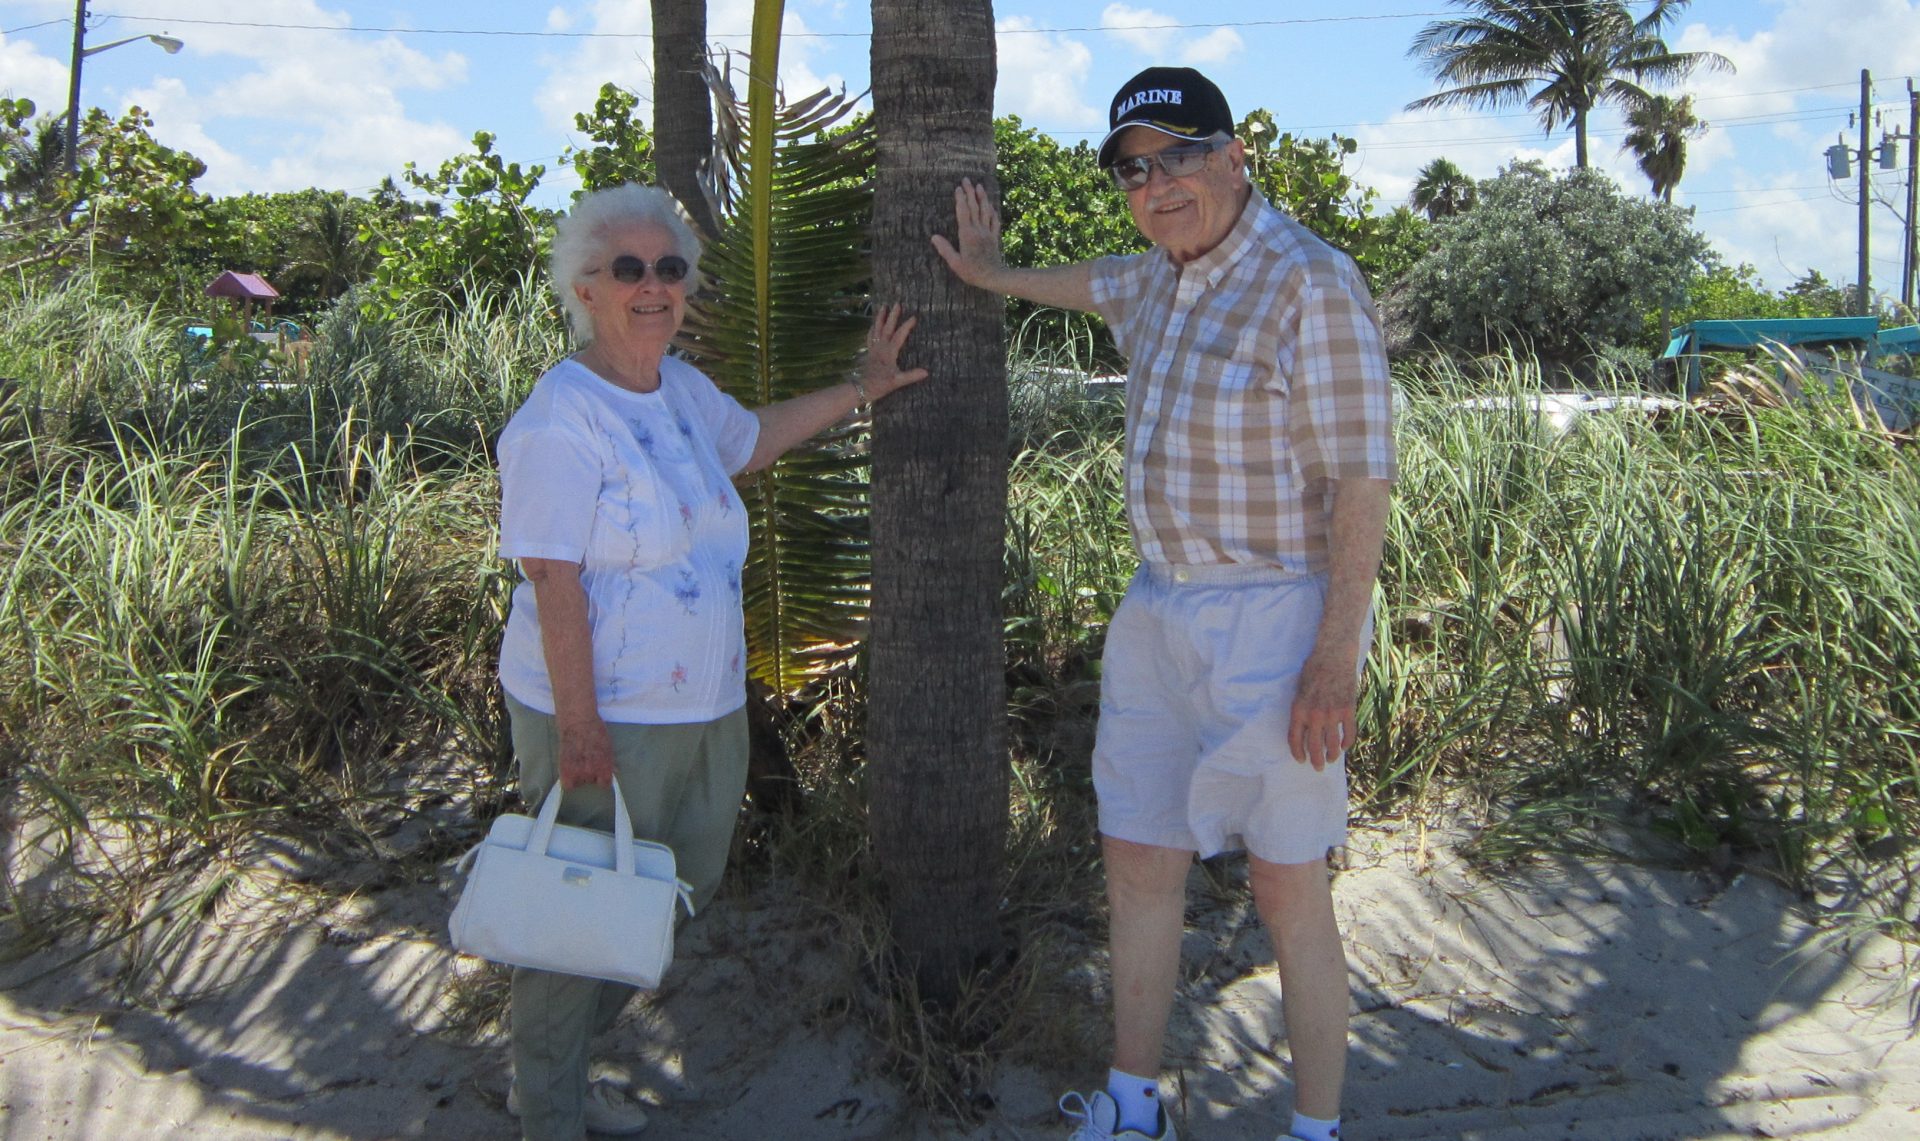 Beverly and Tom at Dania Beach